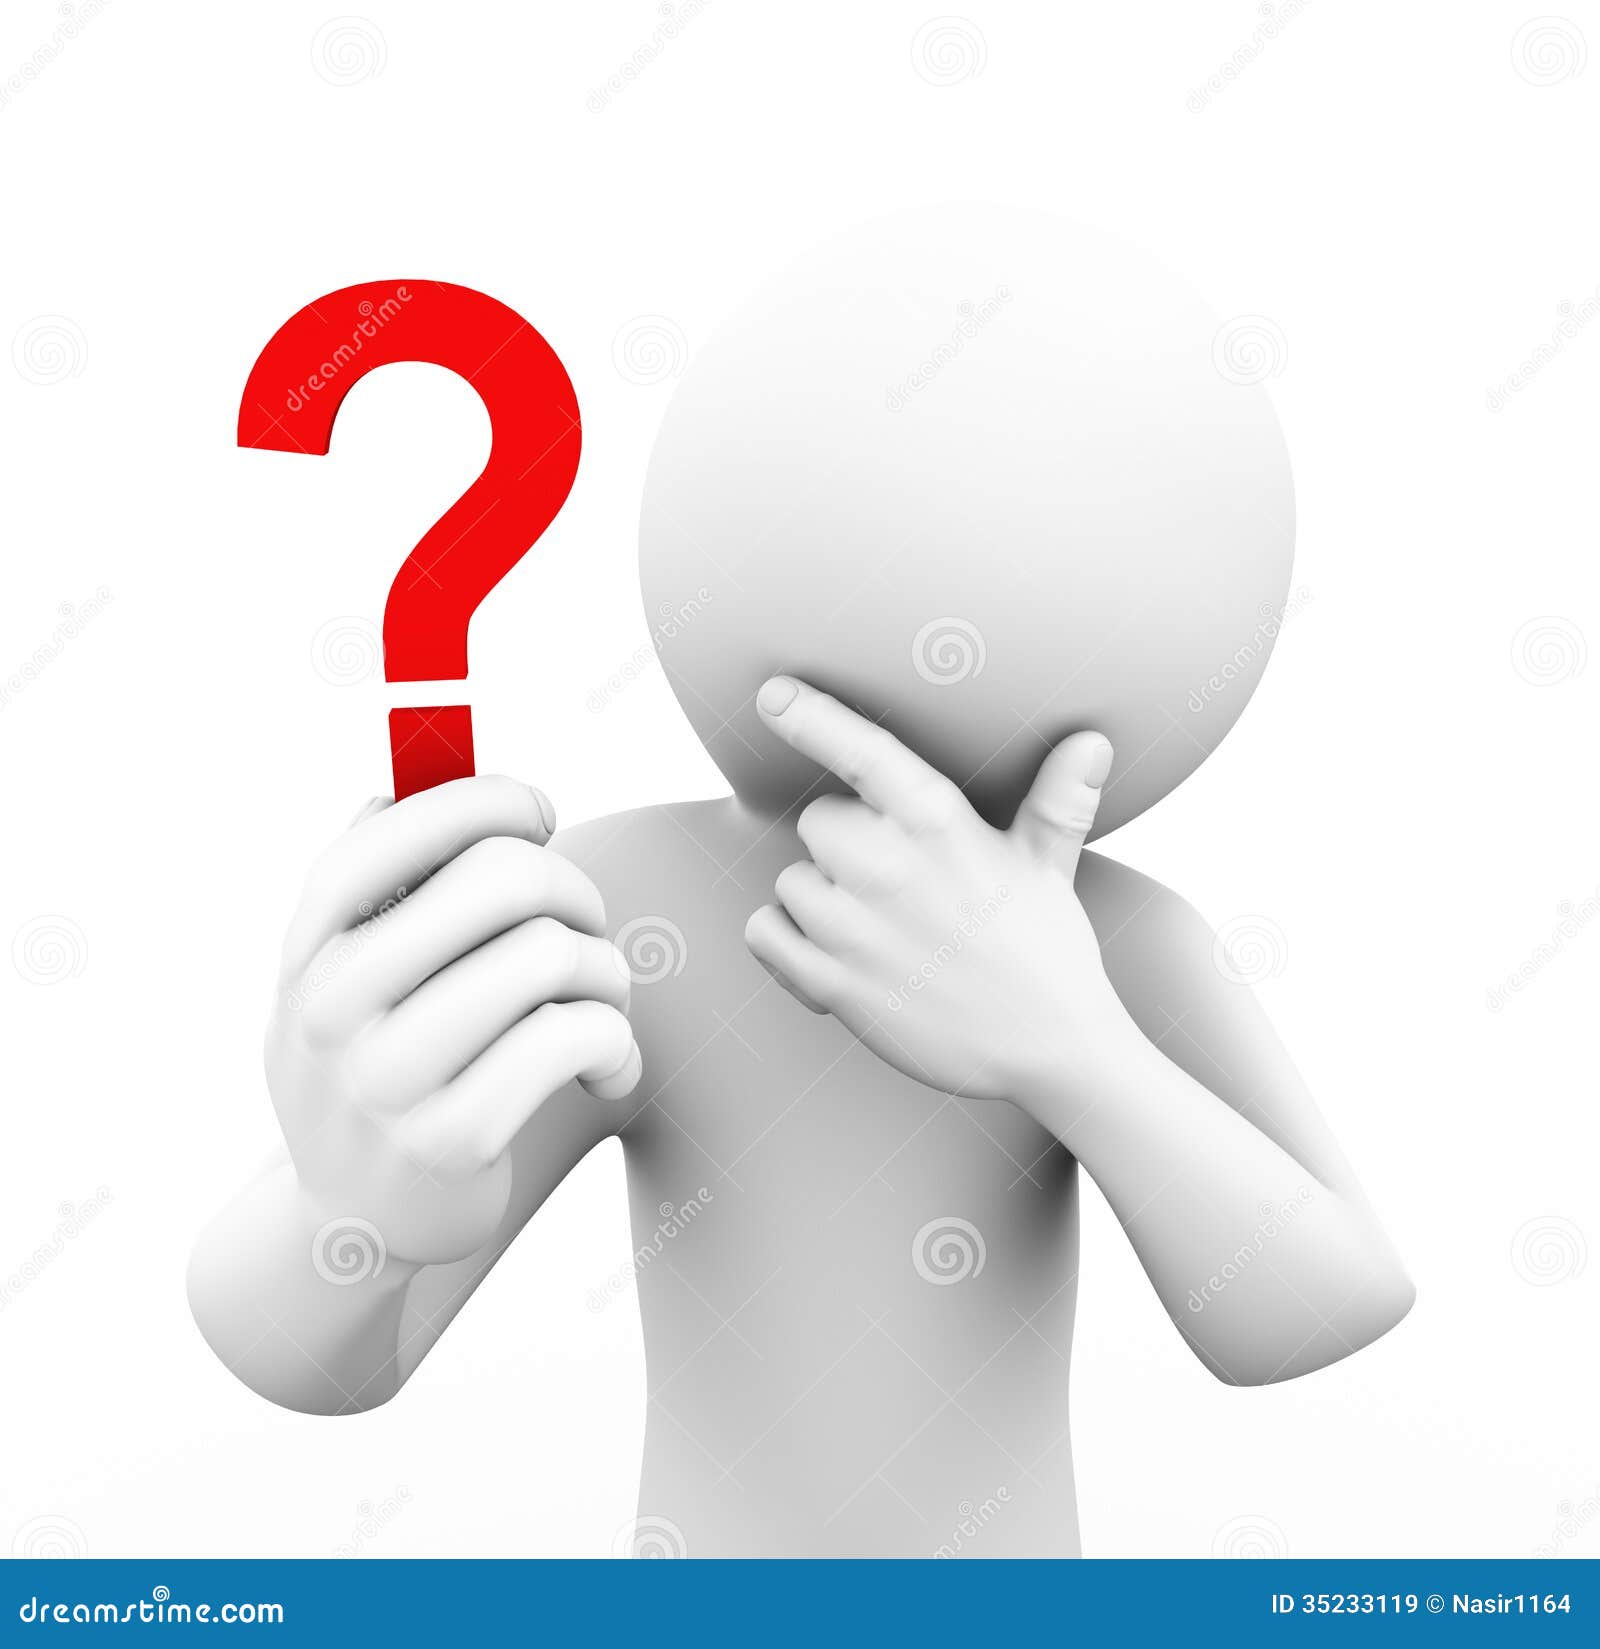 clipart questioning person - photo #18